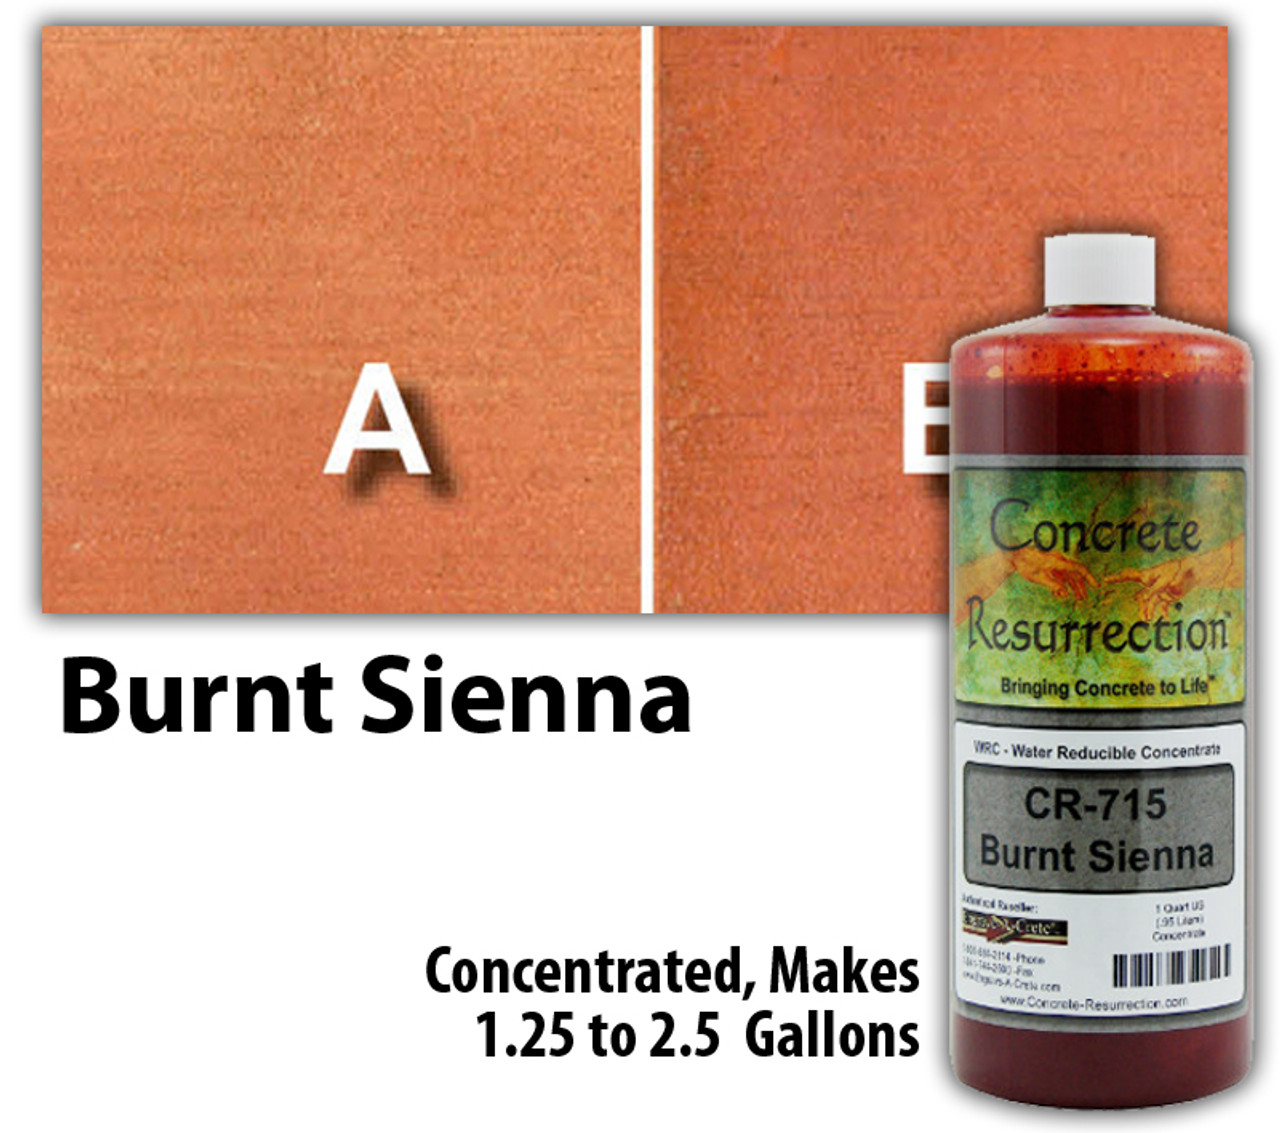 Water Reducible Concentrated (WRC) Concrete Stain - Burnt Sienna 32oz